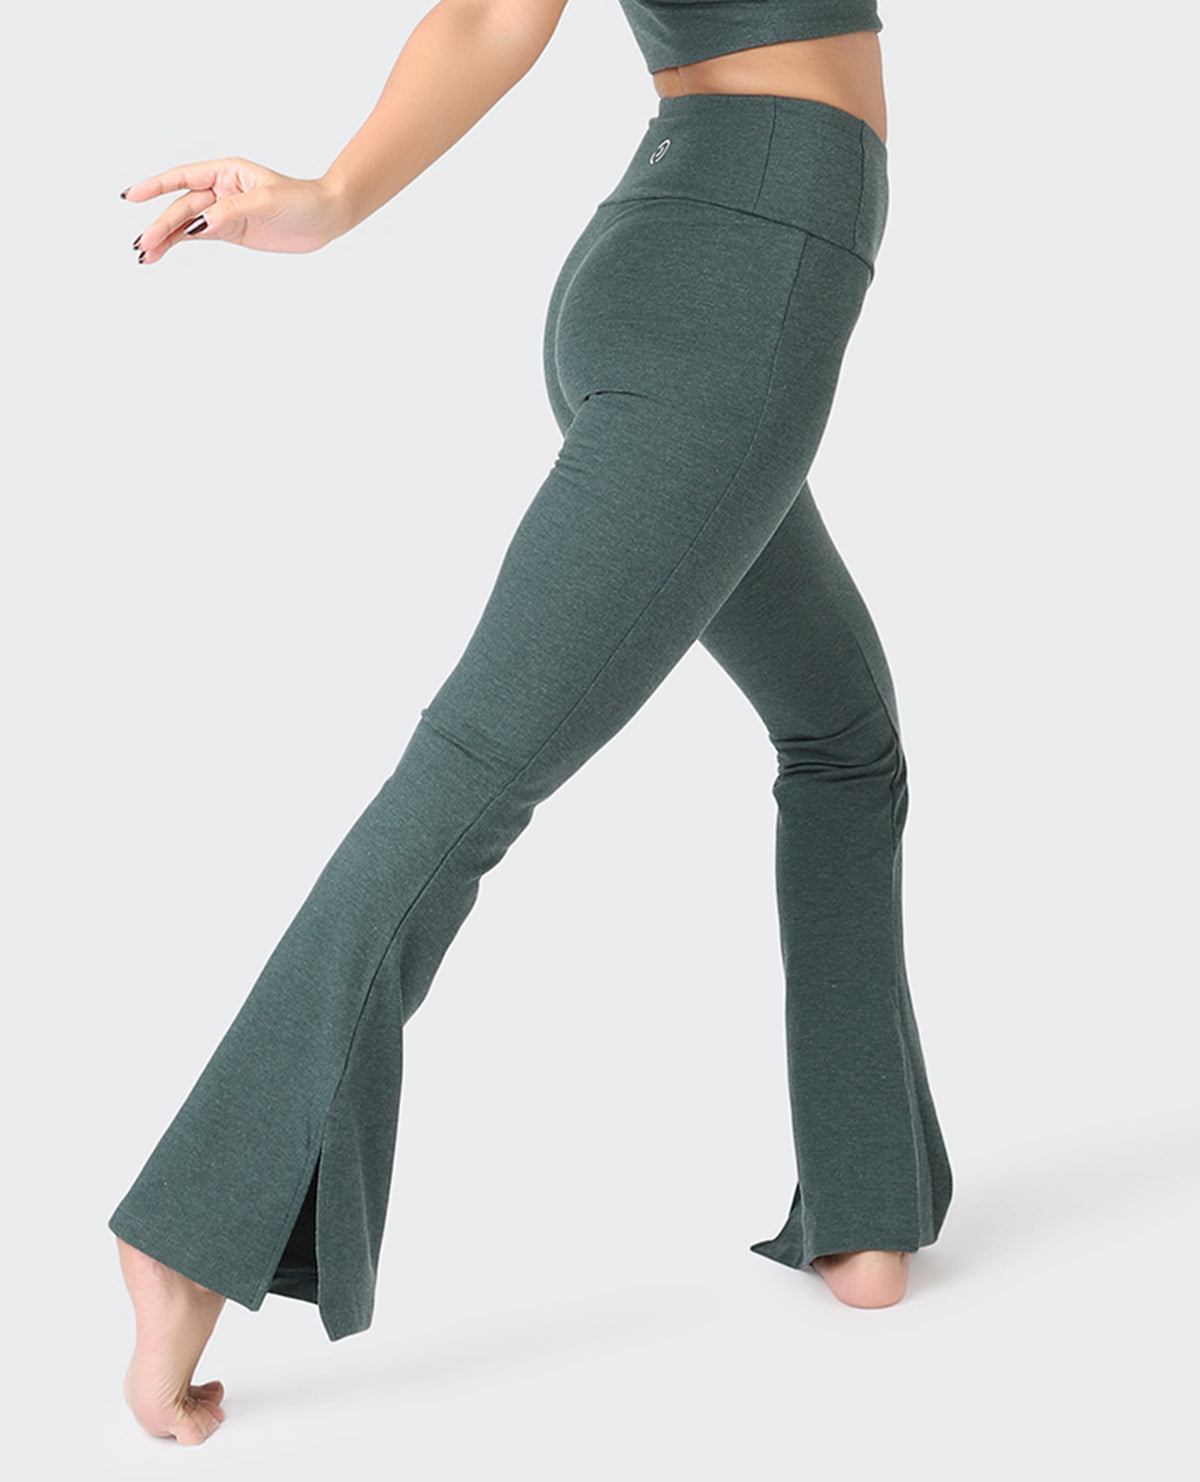  GATXVG Flowy Layered Active Pant for Women Elastic